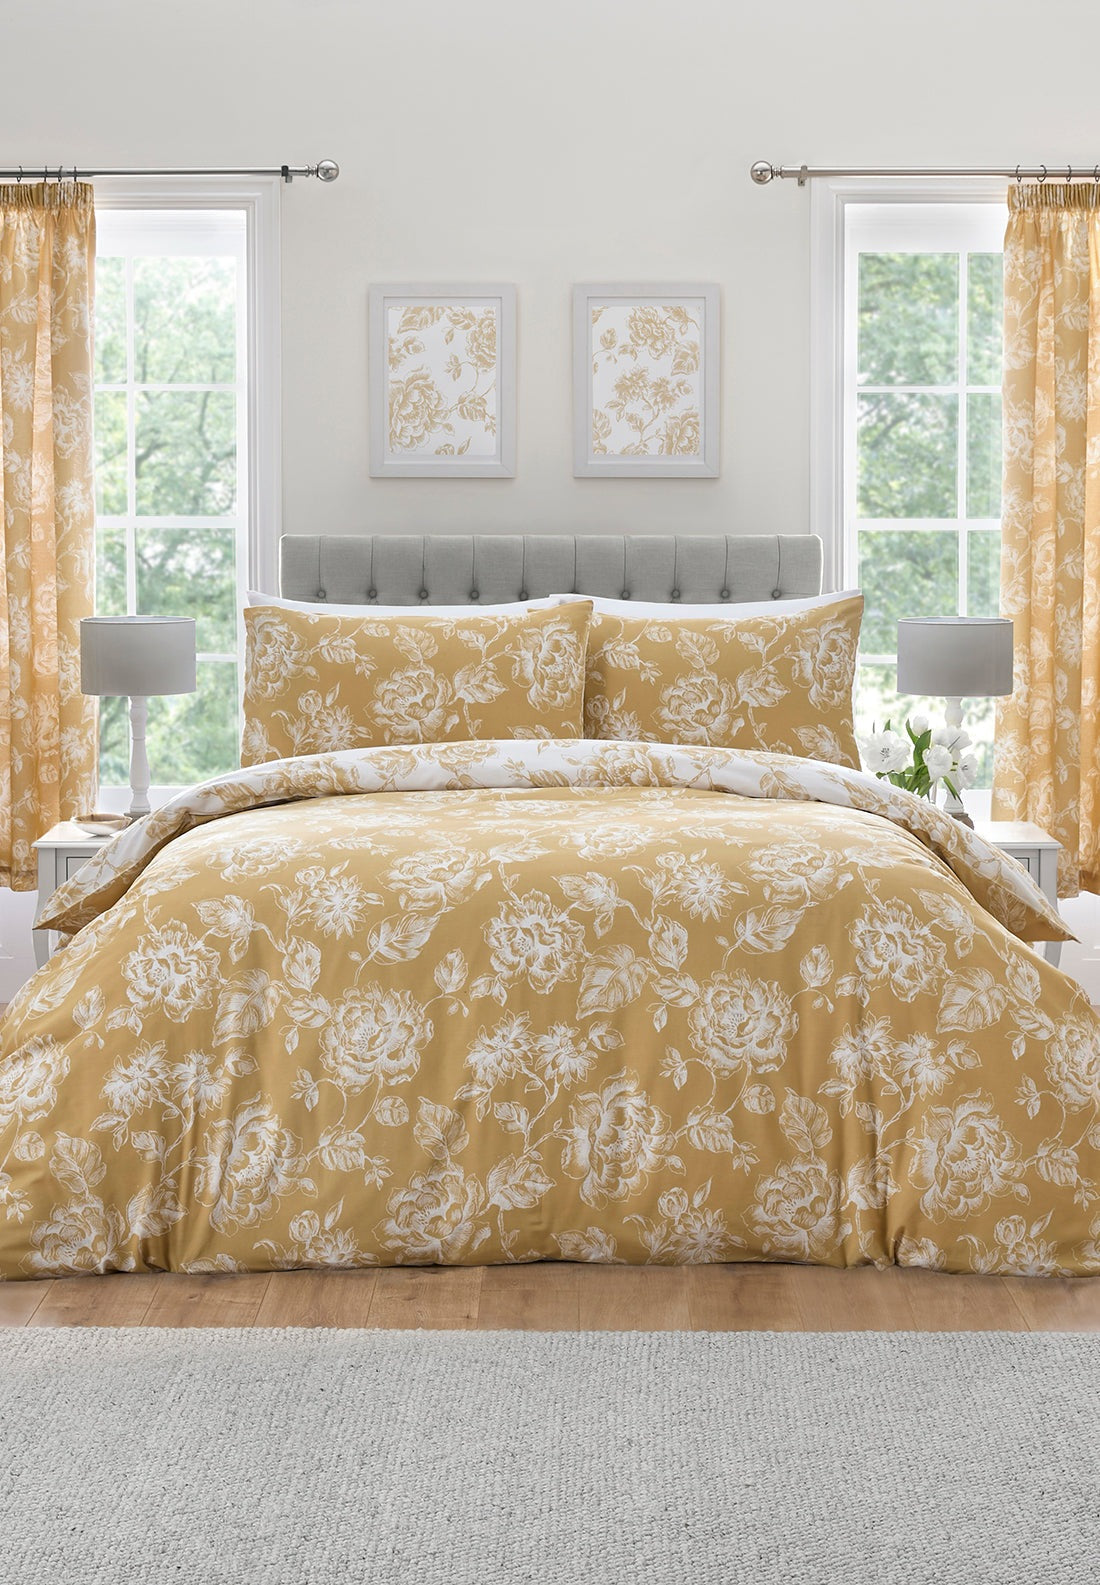 The Home Collection Mimi Duvet Cover Set - Gold 1 Shaws Department Stores